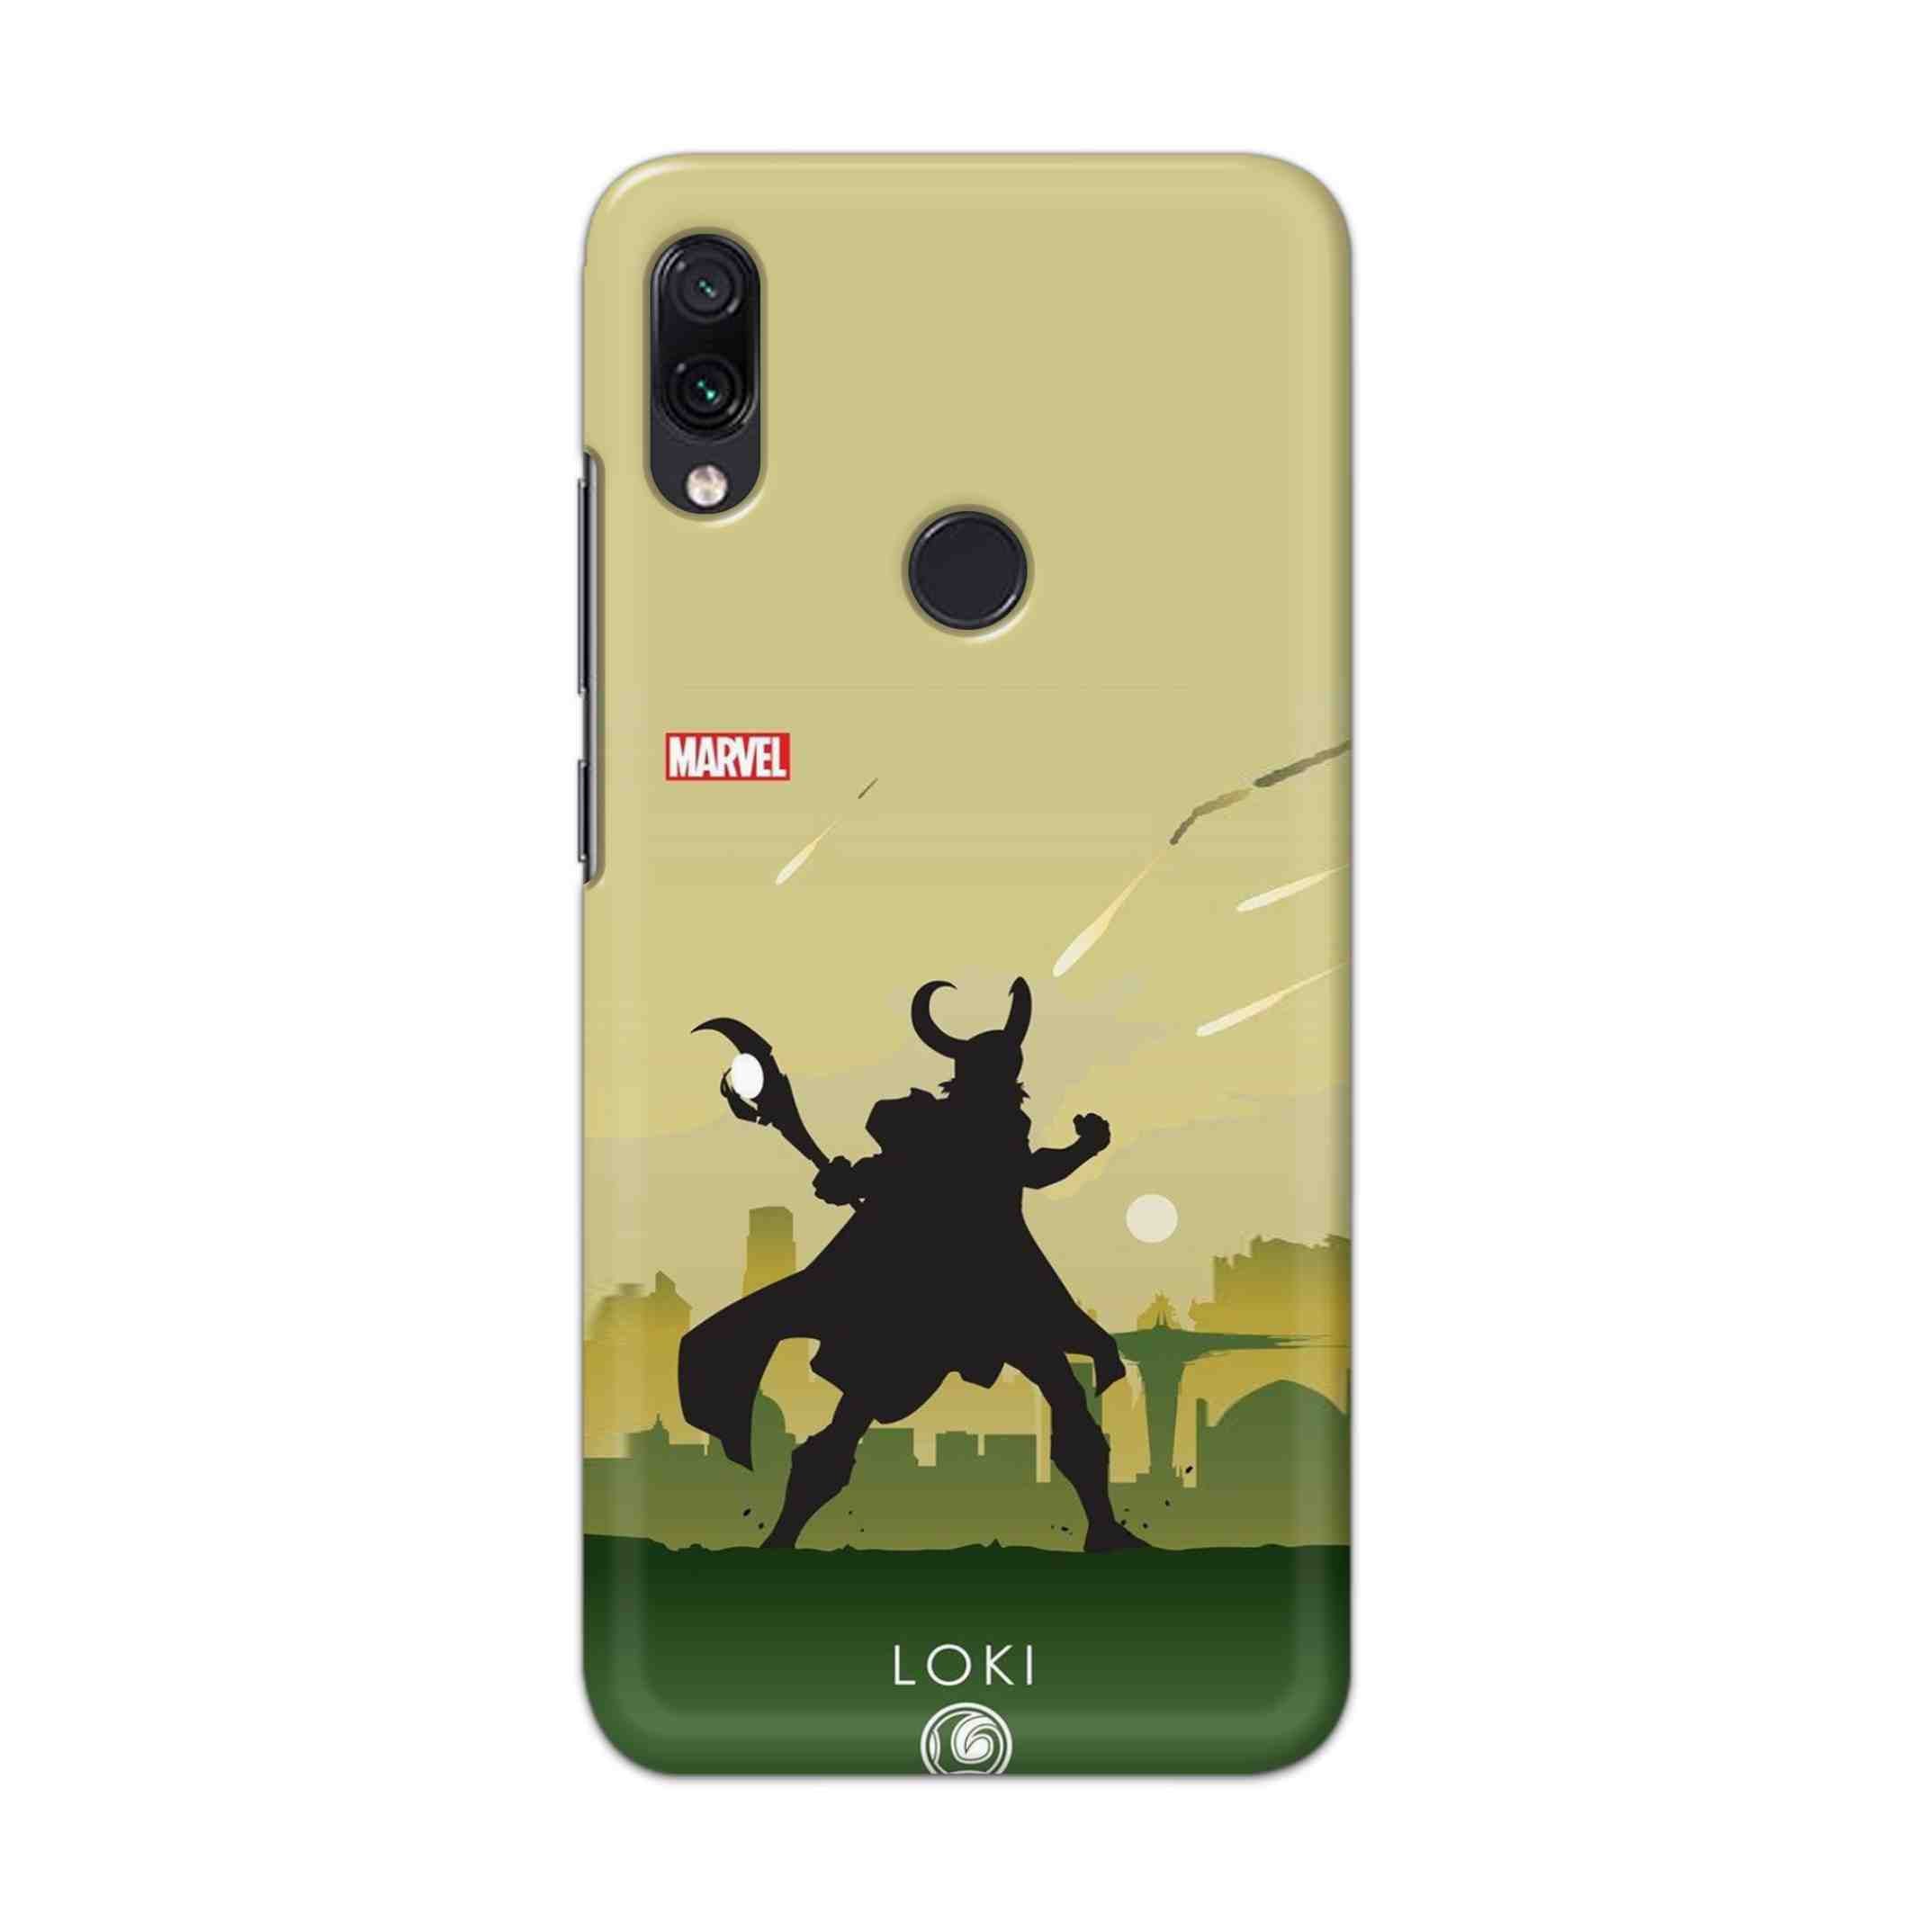 Buy Loki Hard Back Mobile Phone Case Cover For Redmi Note 7 / Note 7 Pro Online